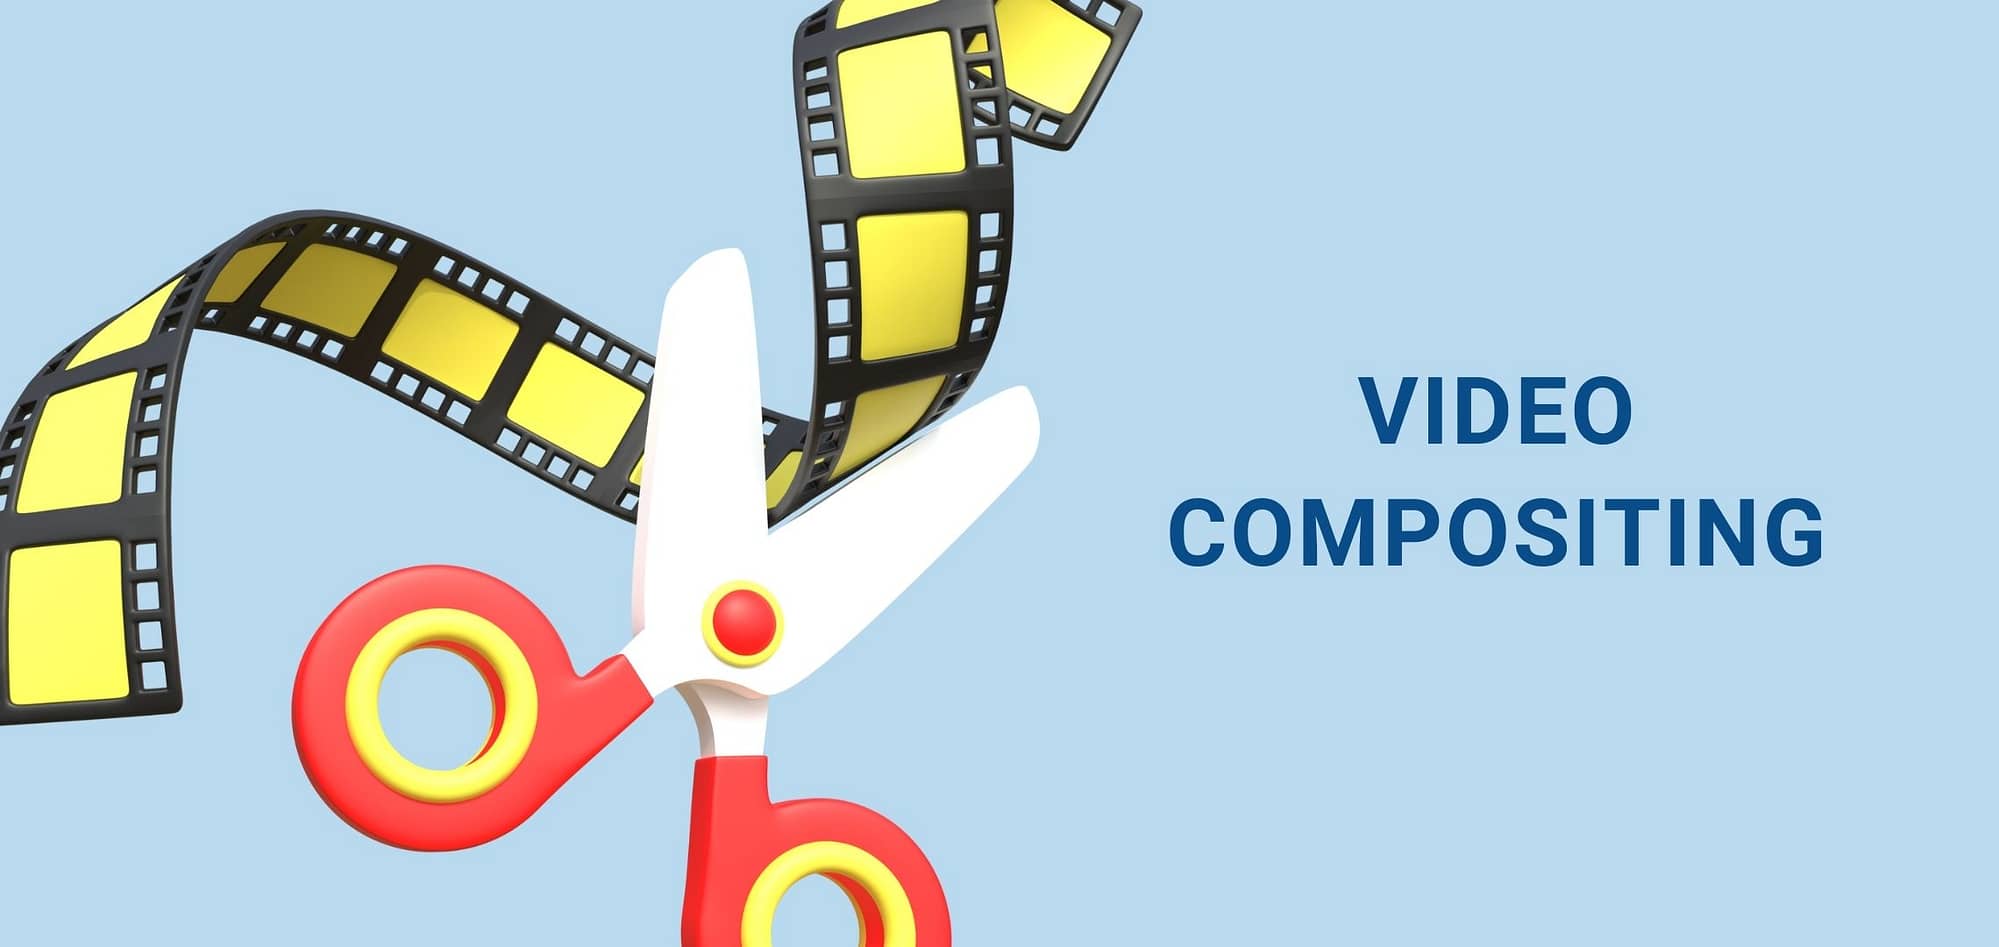 Video Compositing